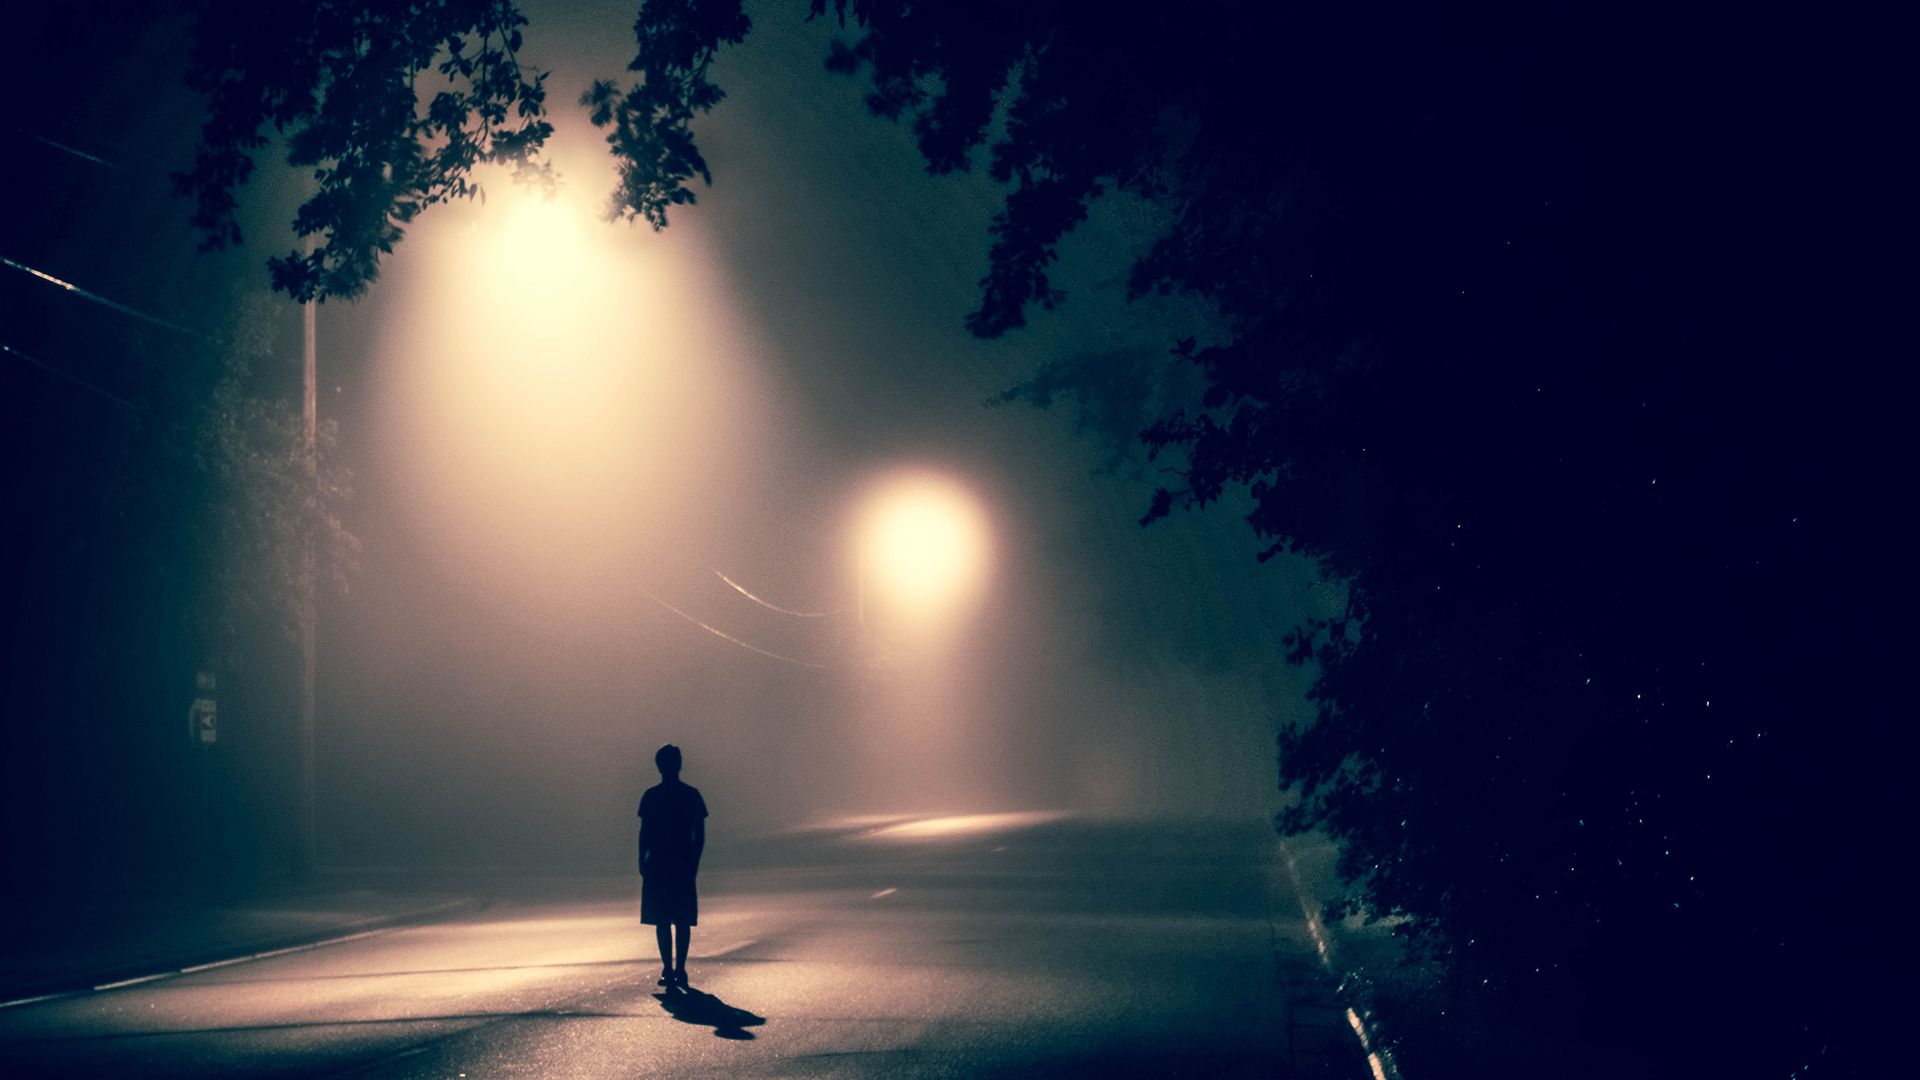 A young person in silhouette on a dark, misty road